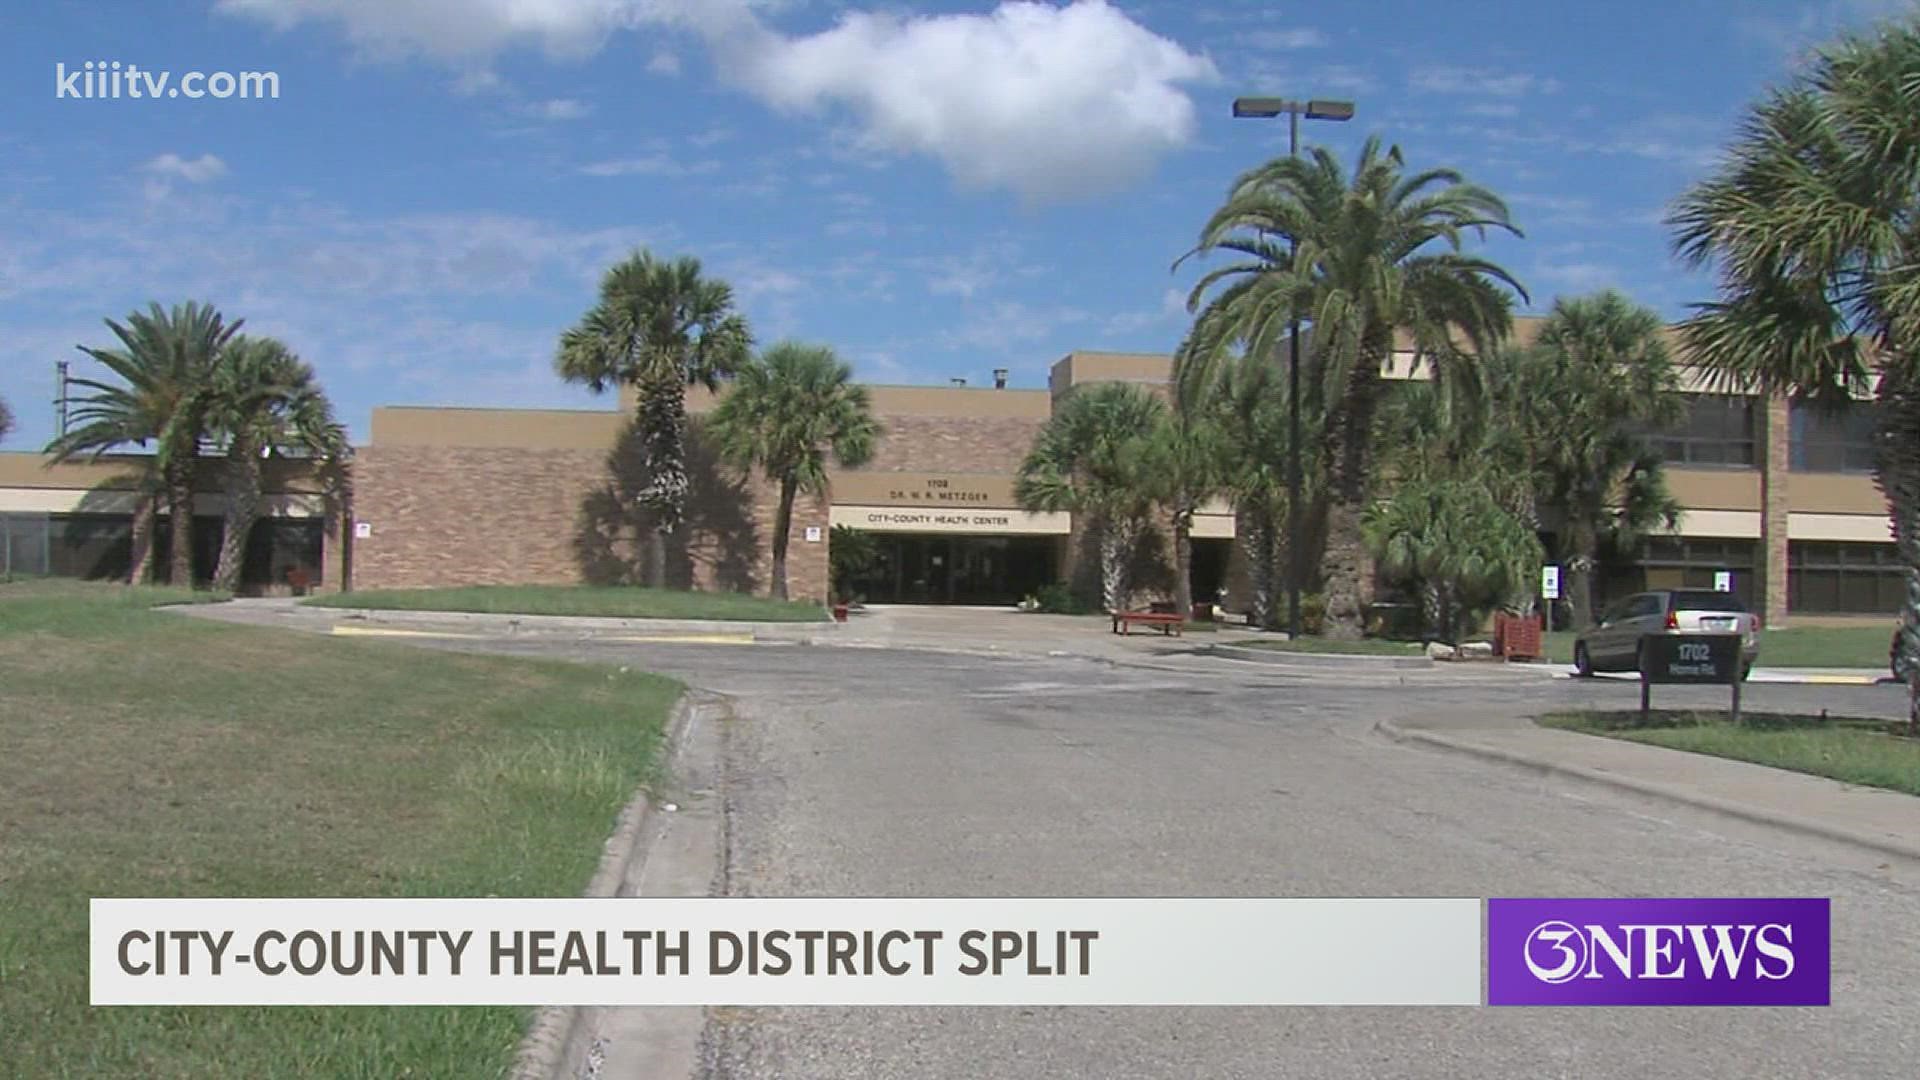 3News worked to get an idea of what the city’s new health district needs to do in 2022 to get accredited.